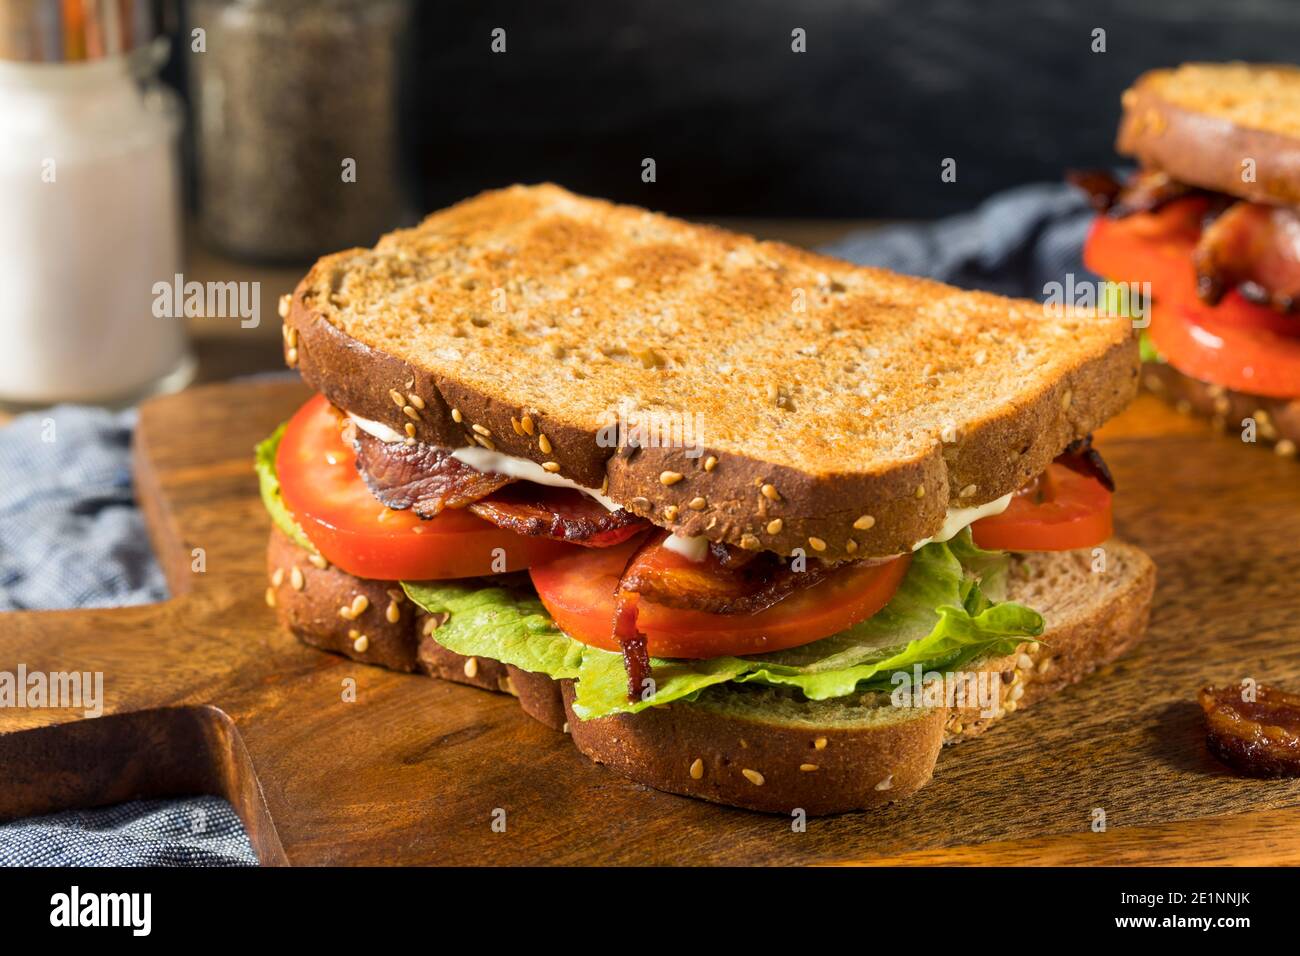 Homemade Bacon BLT Sandwich with Lettuce and Tomato Stock Photo